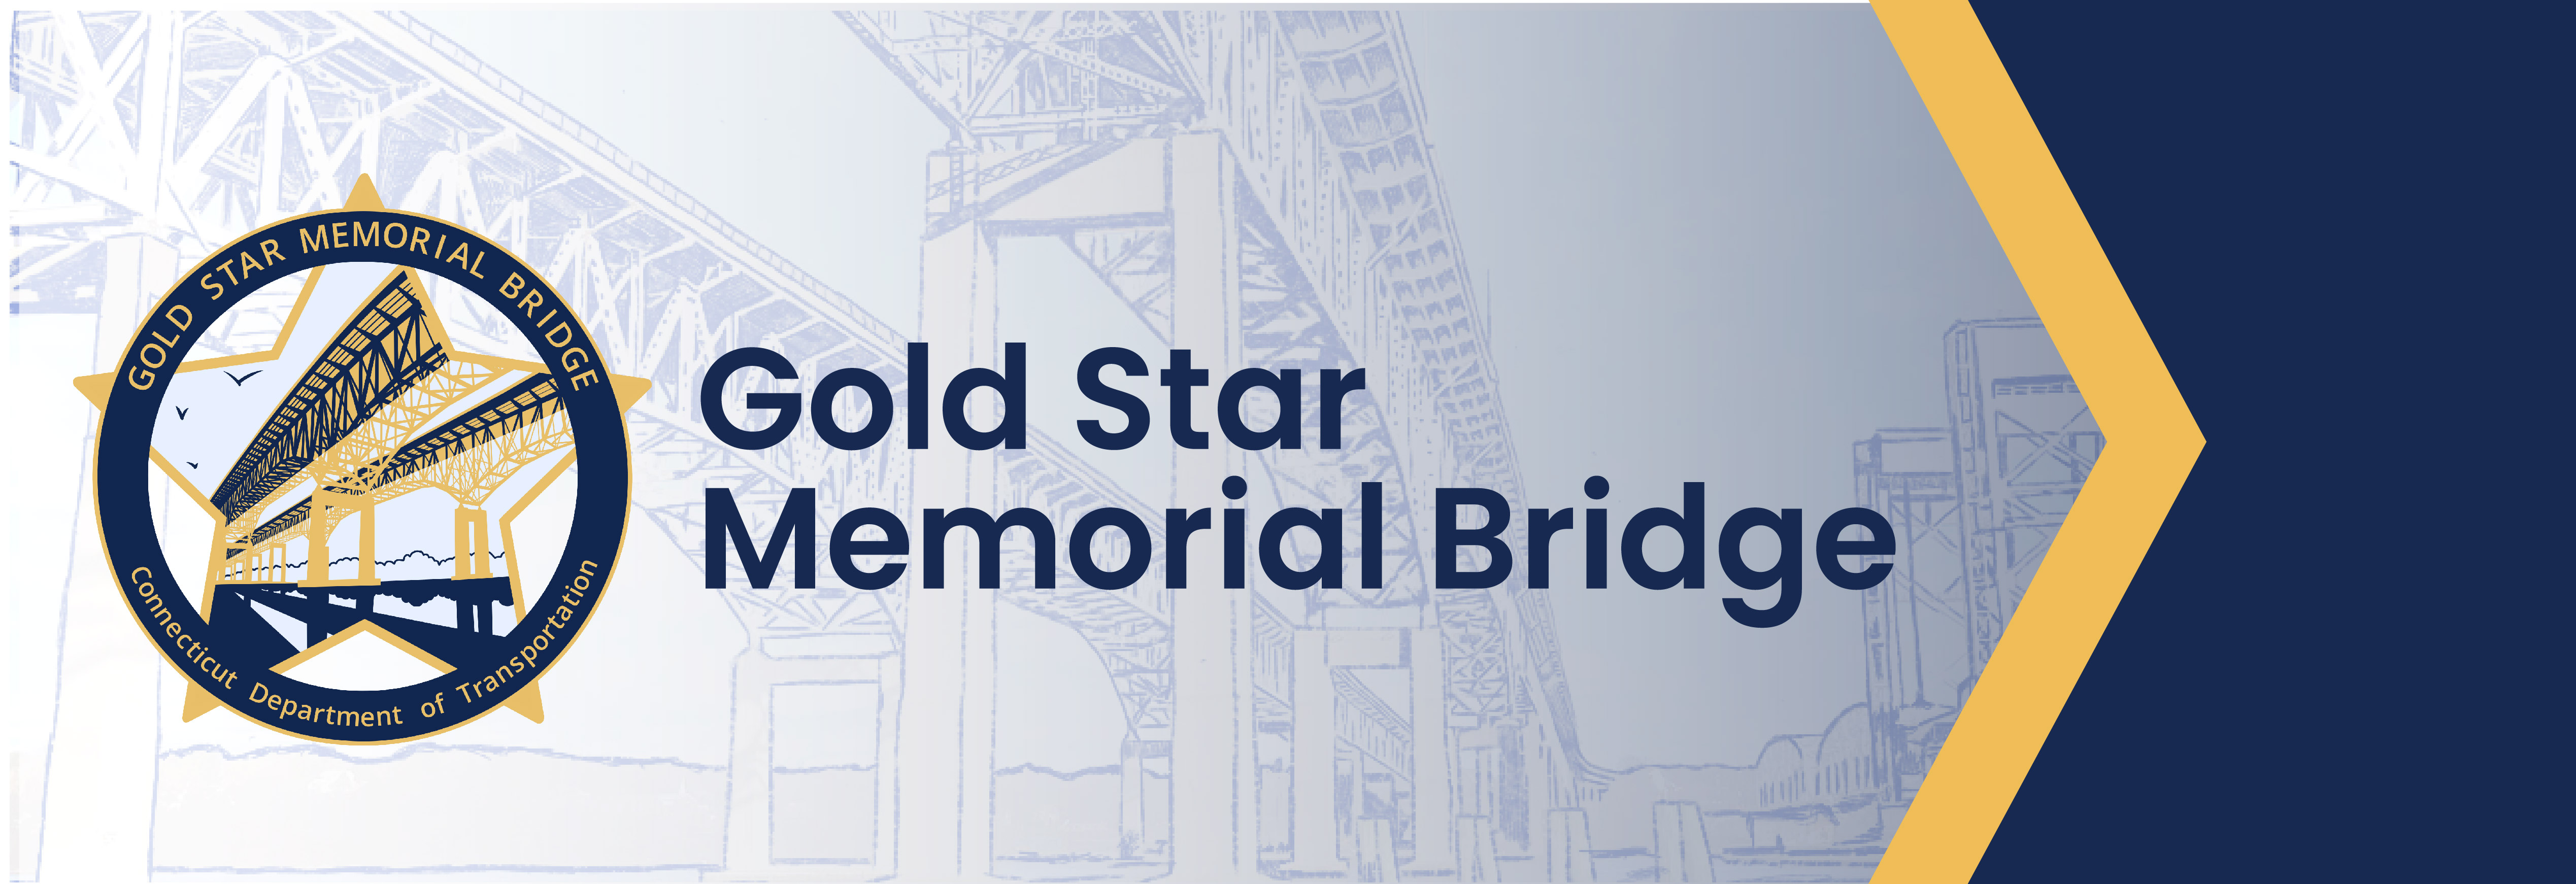 Banner image that includes the title of the page: "Gold Star Memorial Bridge" with the accompanying logo, on top of a set of translucent blueprints